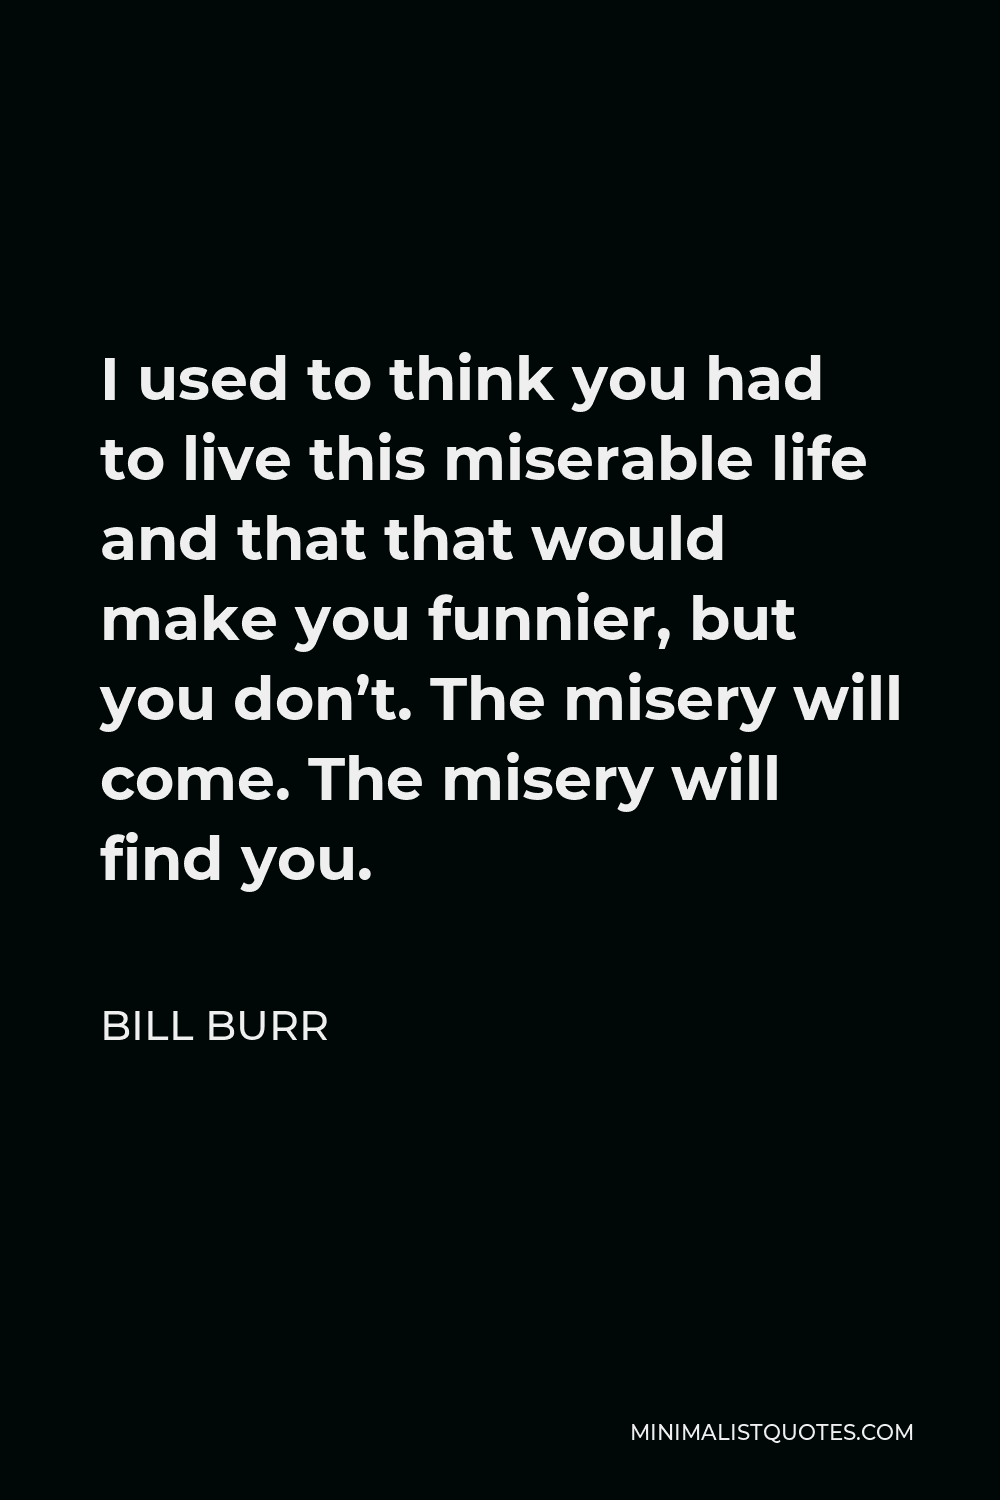 Bill Burr Quote - I used to think you had to live this miserable life and that that would make you funnier, but you don’t. The misery will come. The misery will find you.